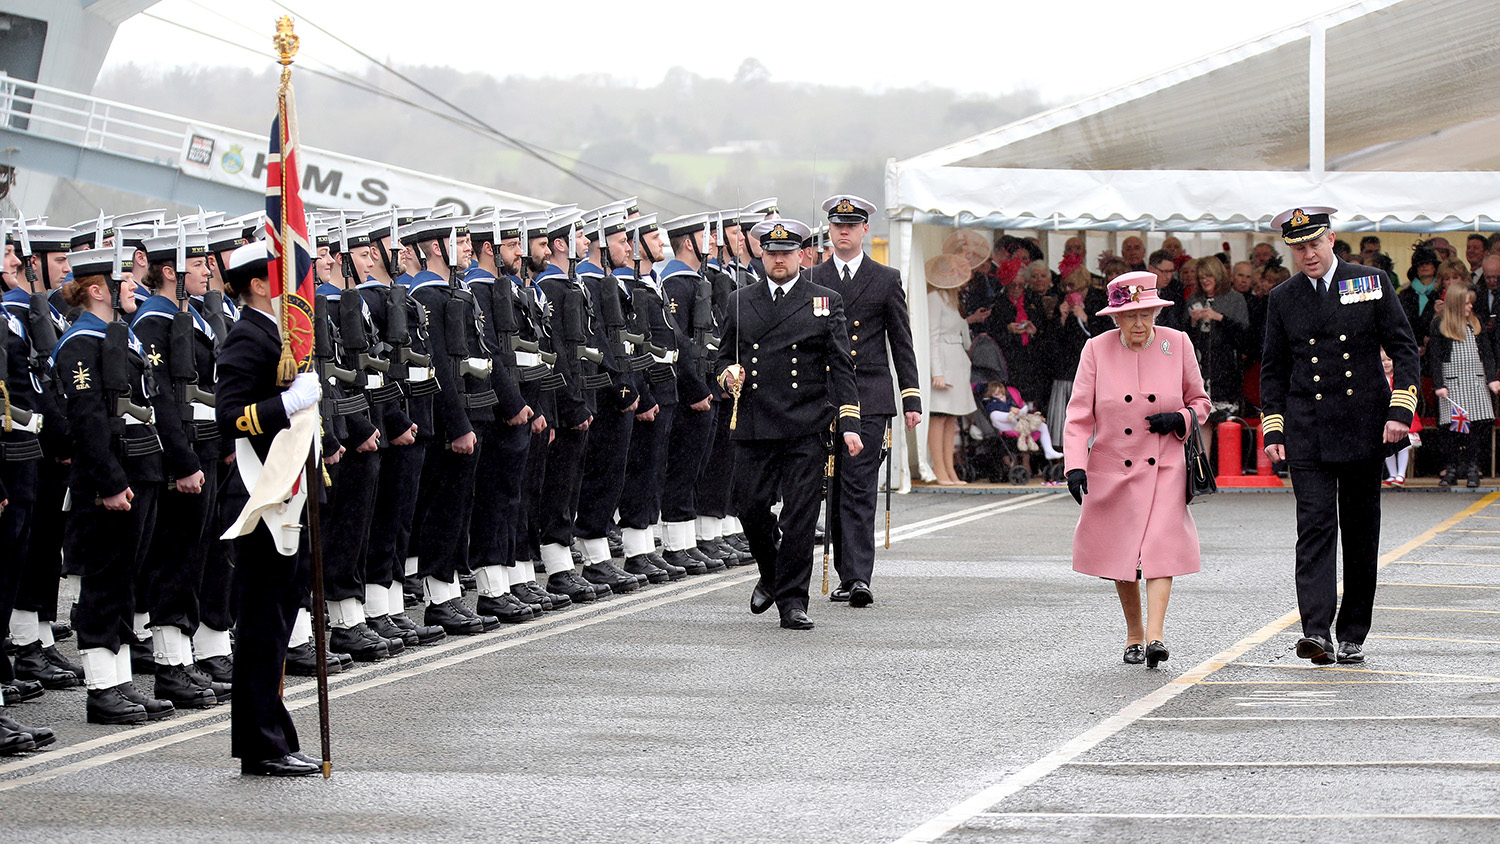 HMS Ocean leaves service with a royal farewell